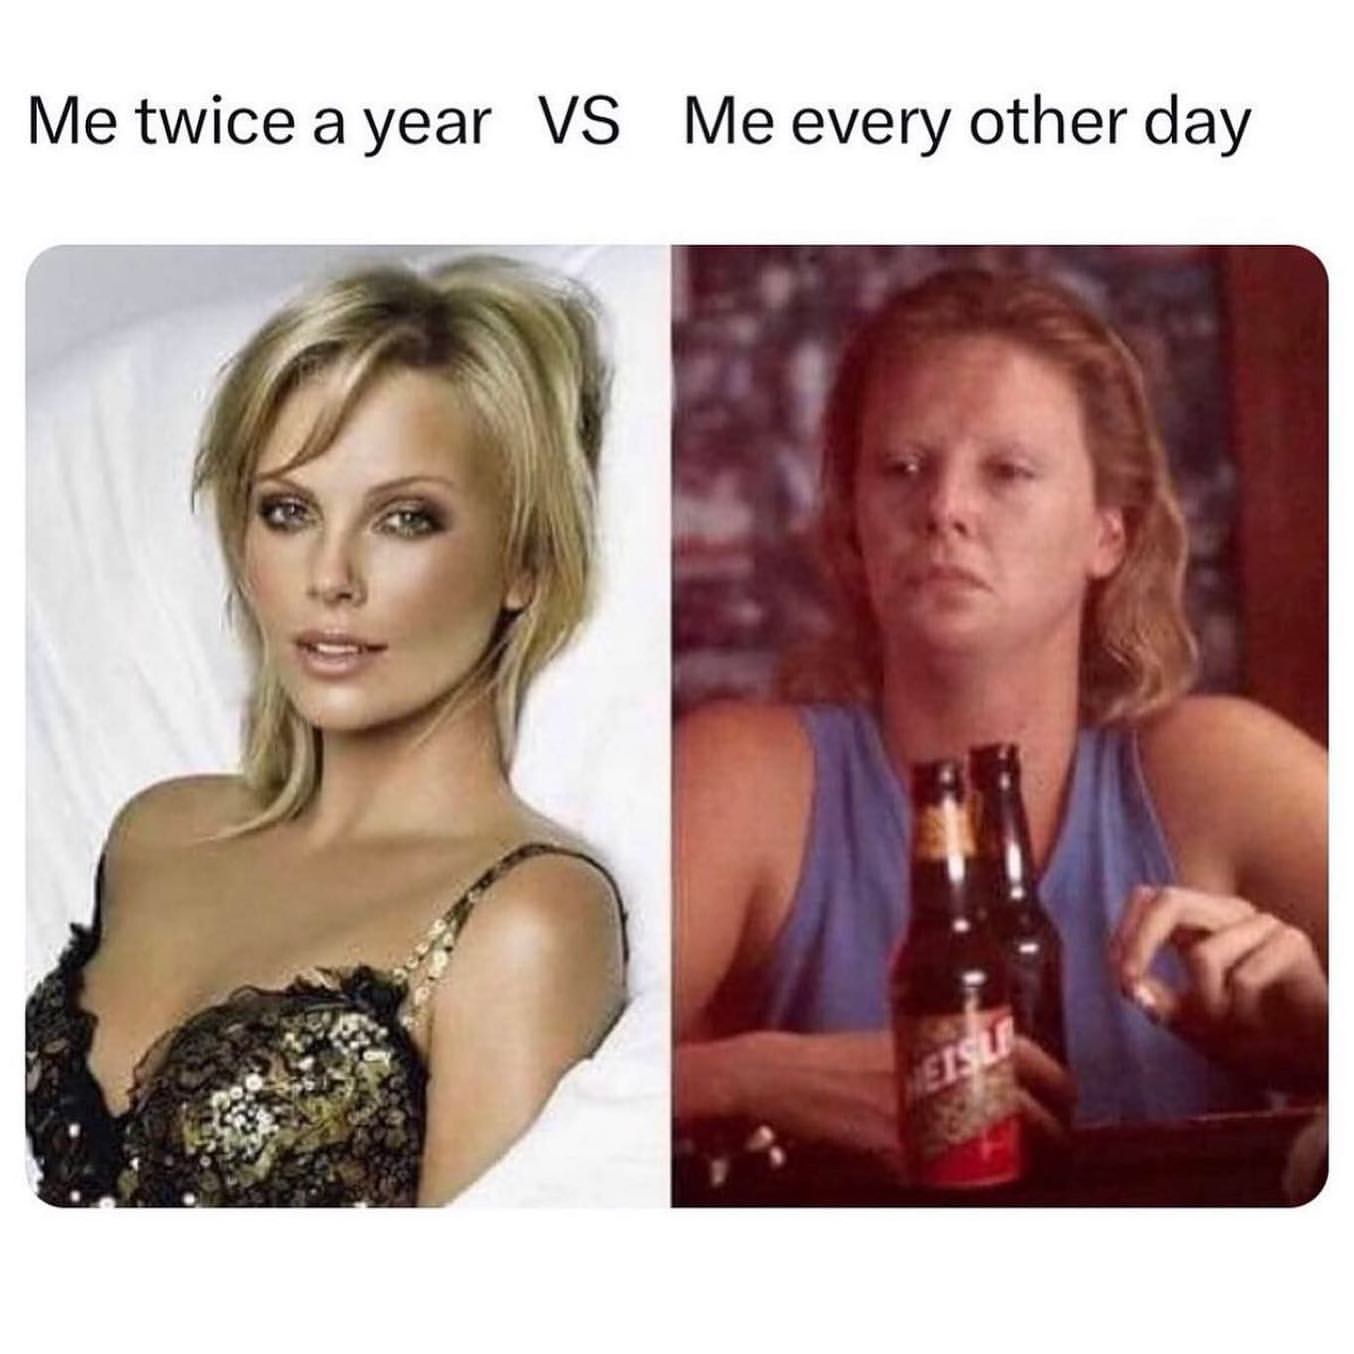 Me twice a year VS Me every other day.